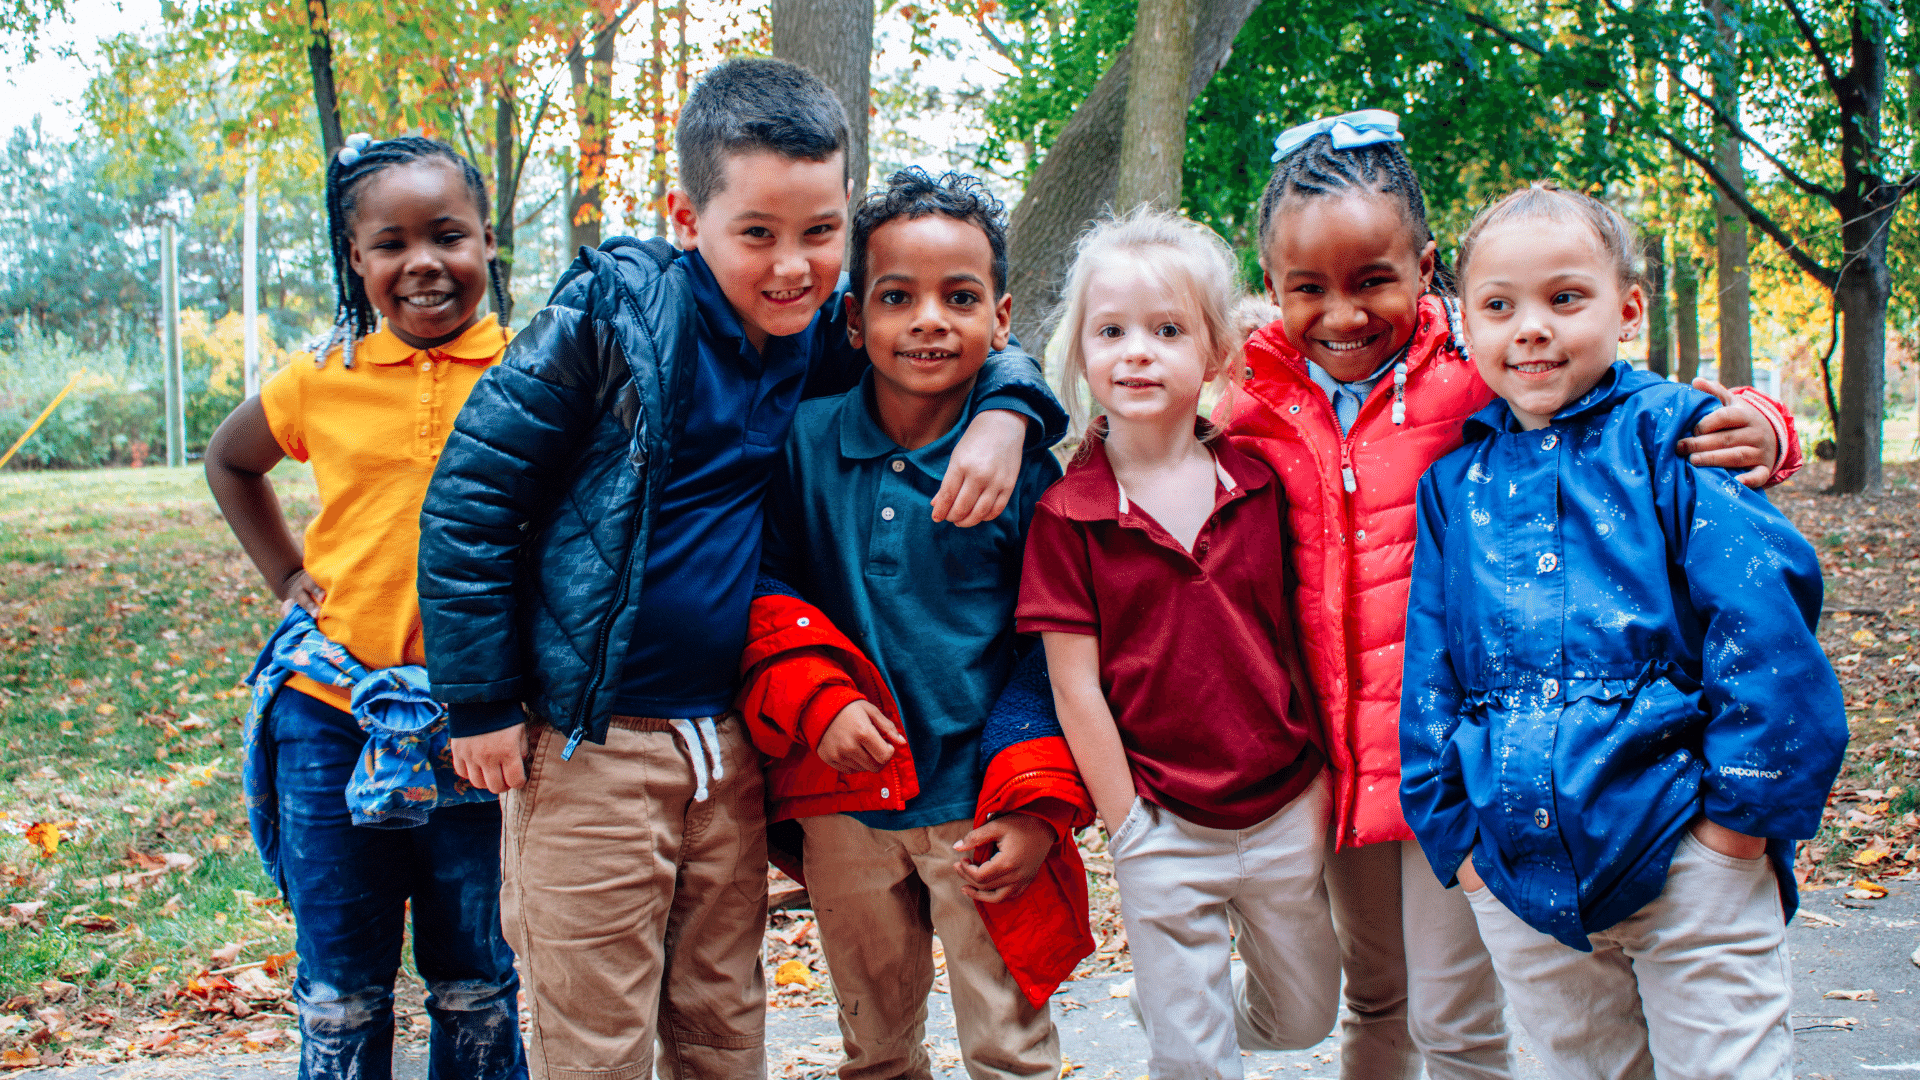 A group of 6 young children wearing bright colors standing outside with their arms around each other.